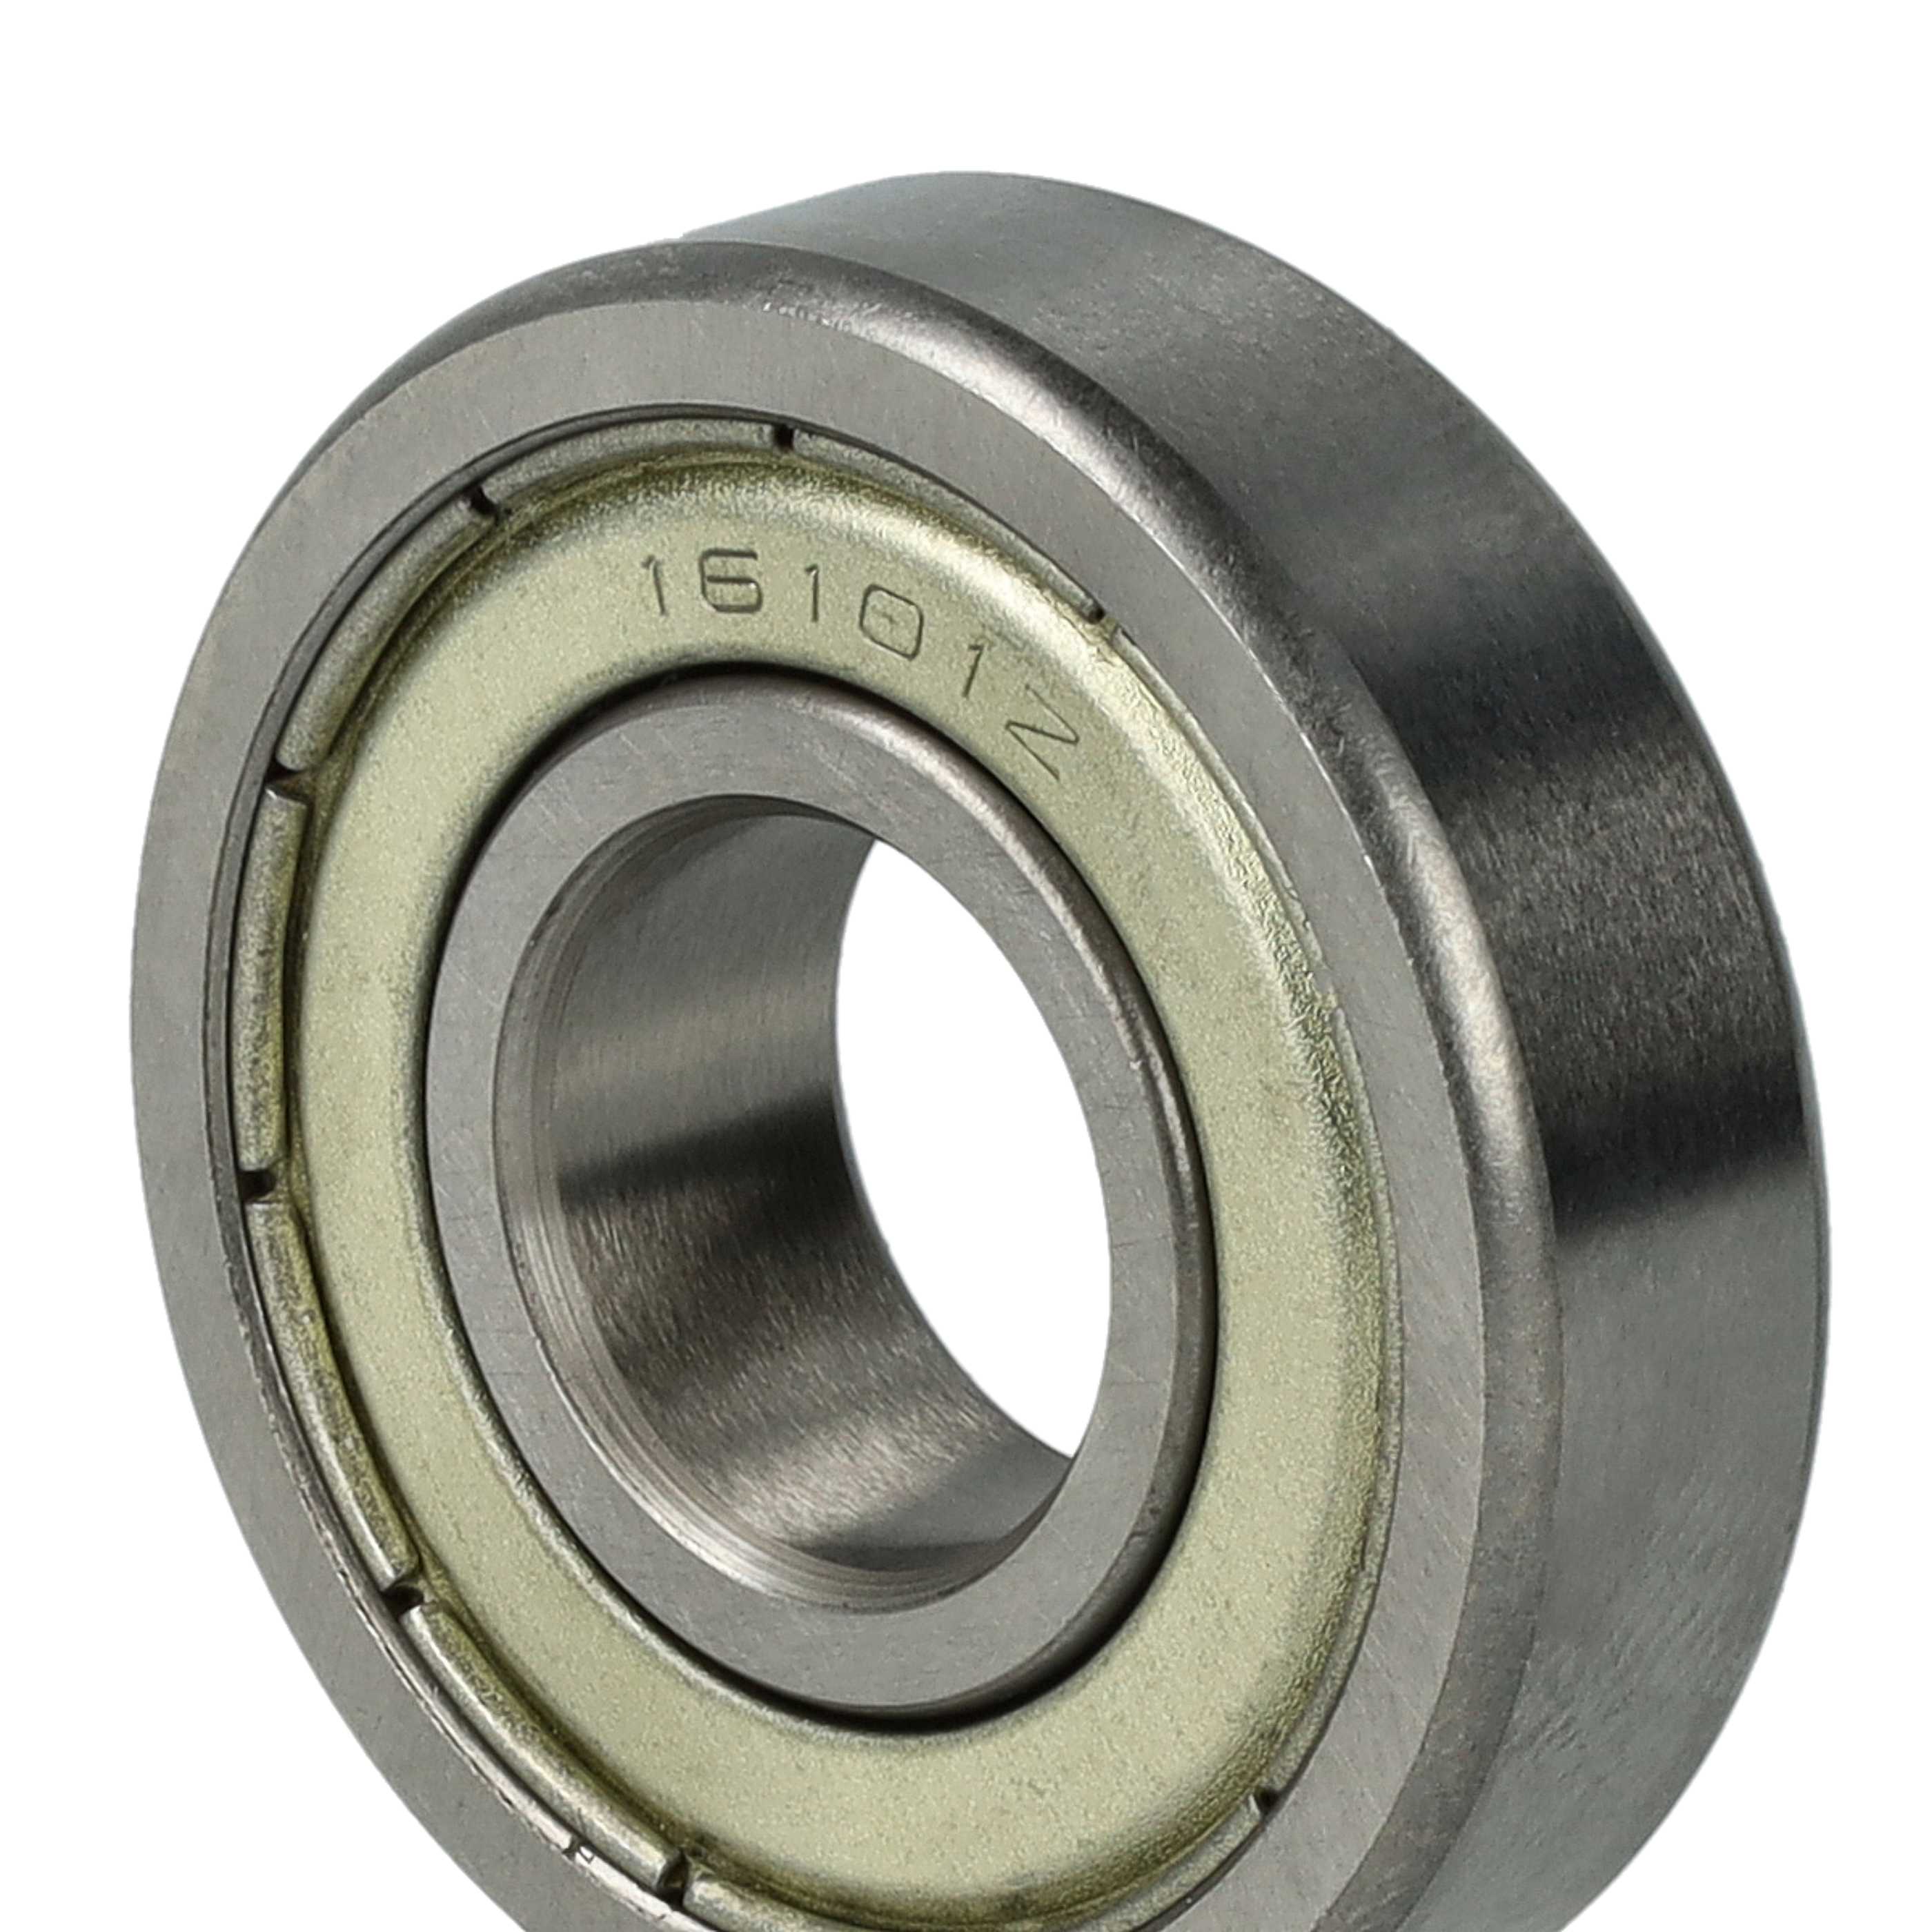 Deep Groove Ball Bearing suitable for Bigshot Sizzix Stamping Machines, Bicycles, Tools, Washing Machines etc.